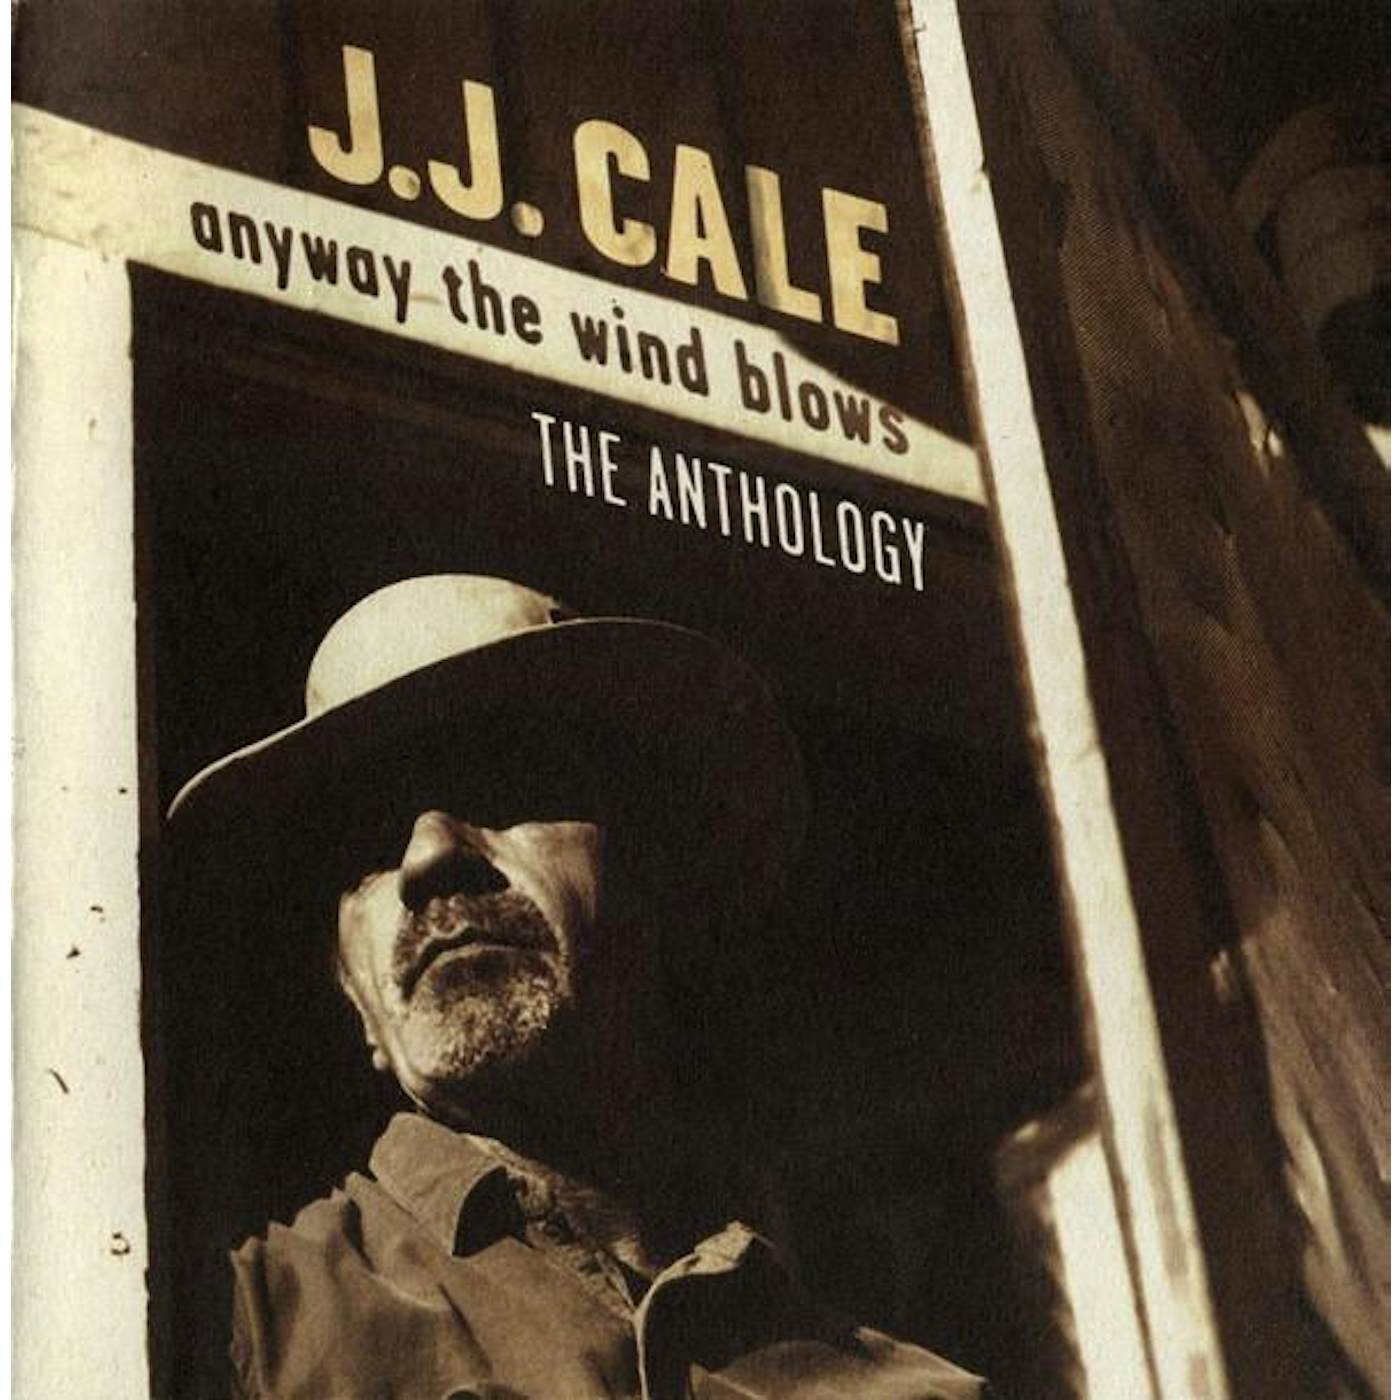 J.J. Cale ANYWAY WIND BLOWS: ANTHOLOGY CD